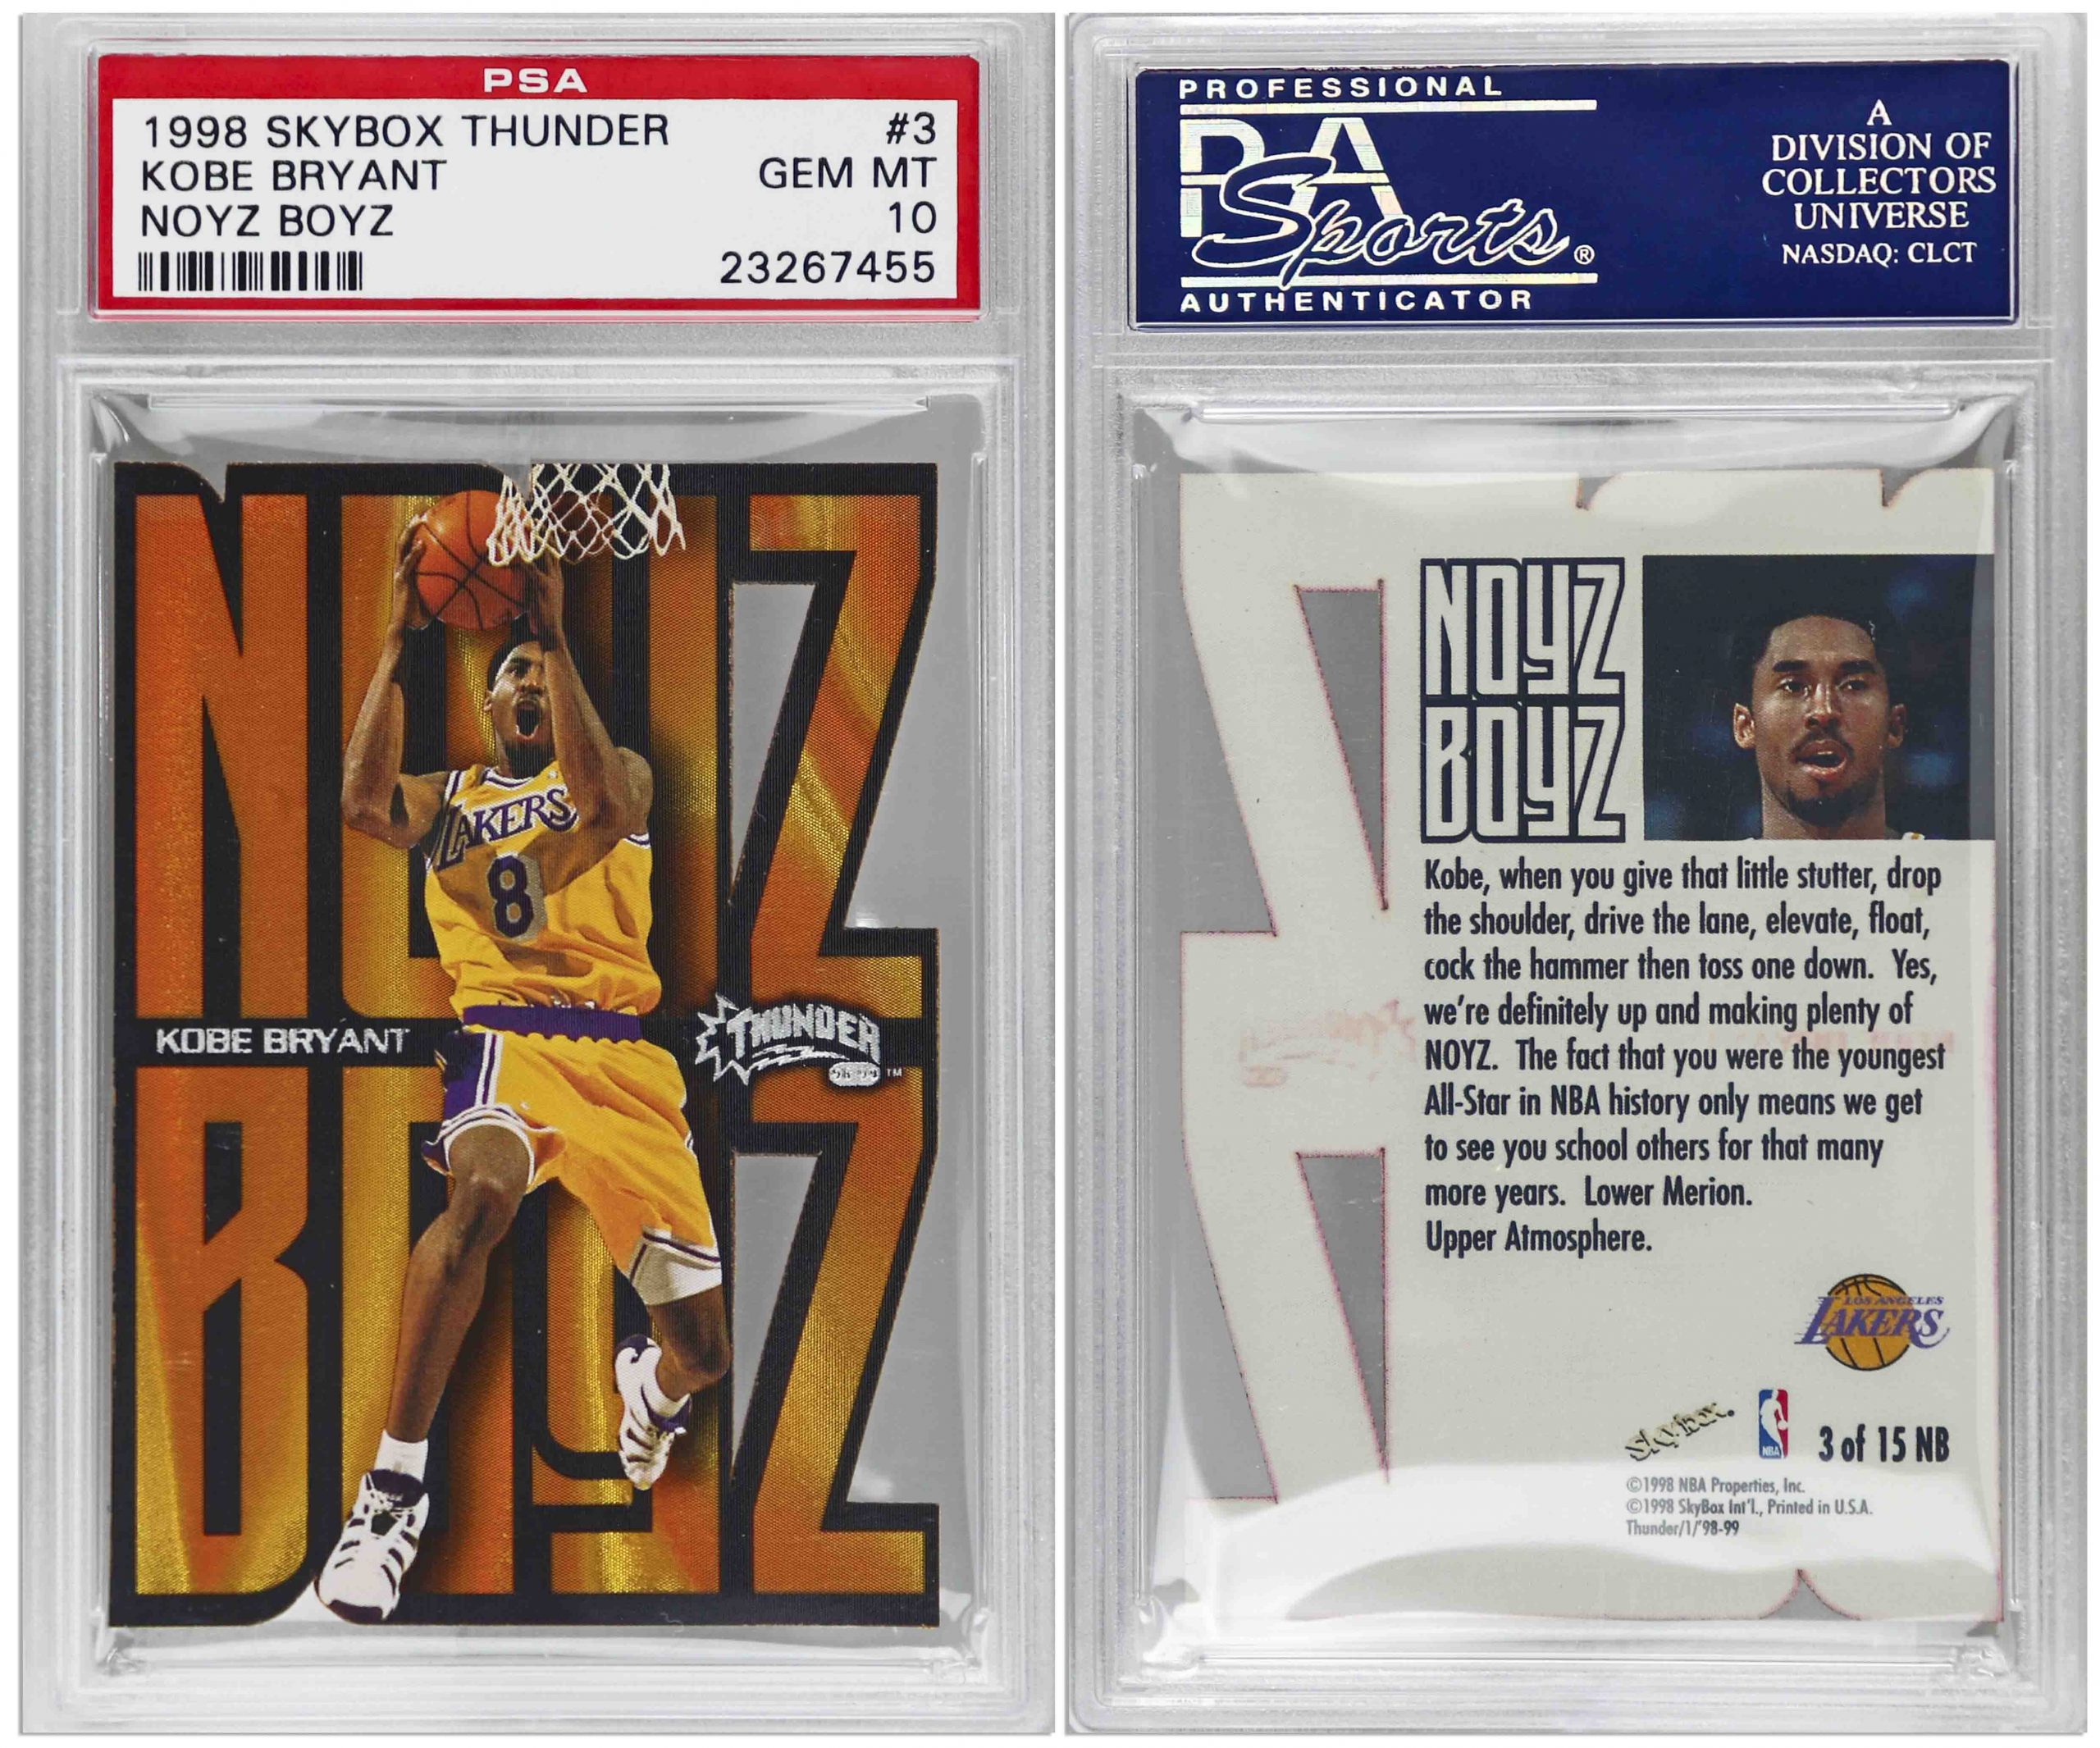 Auction Sell a 1997-98 Kobe Bryant Topps Finest Creation 